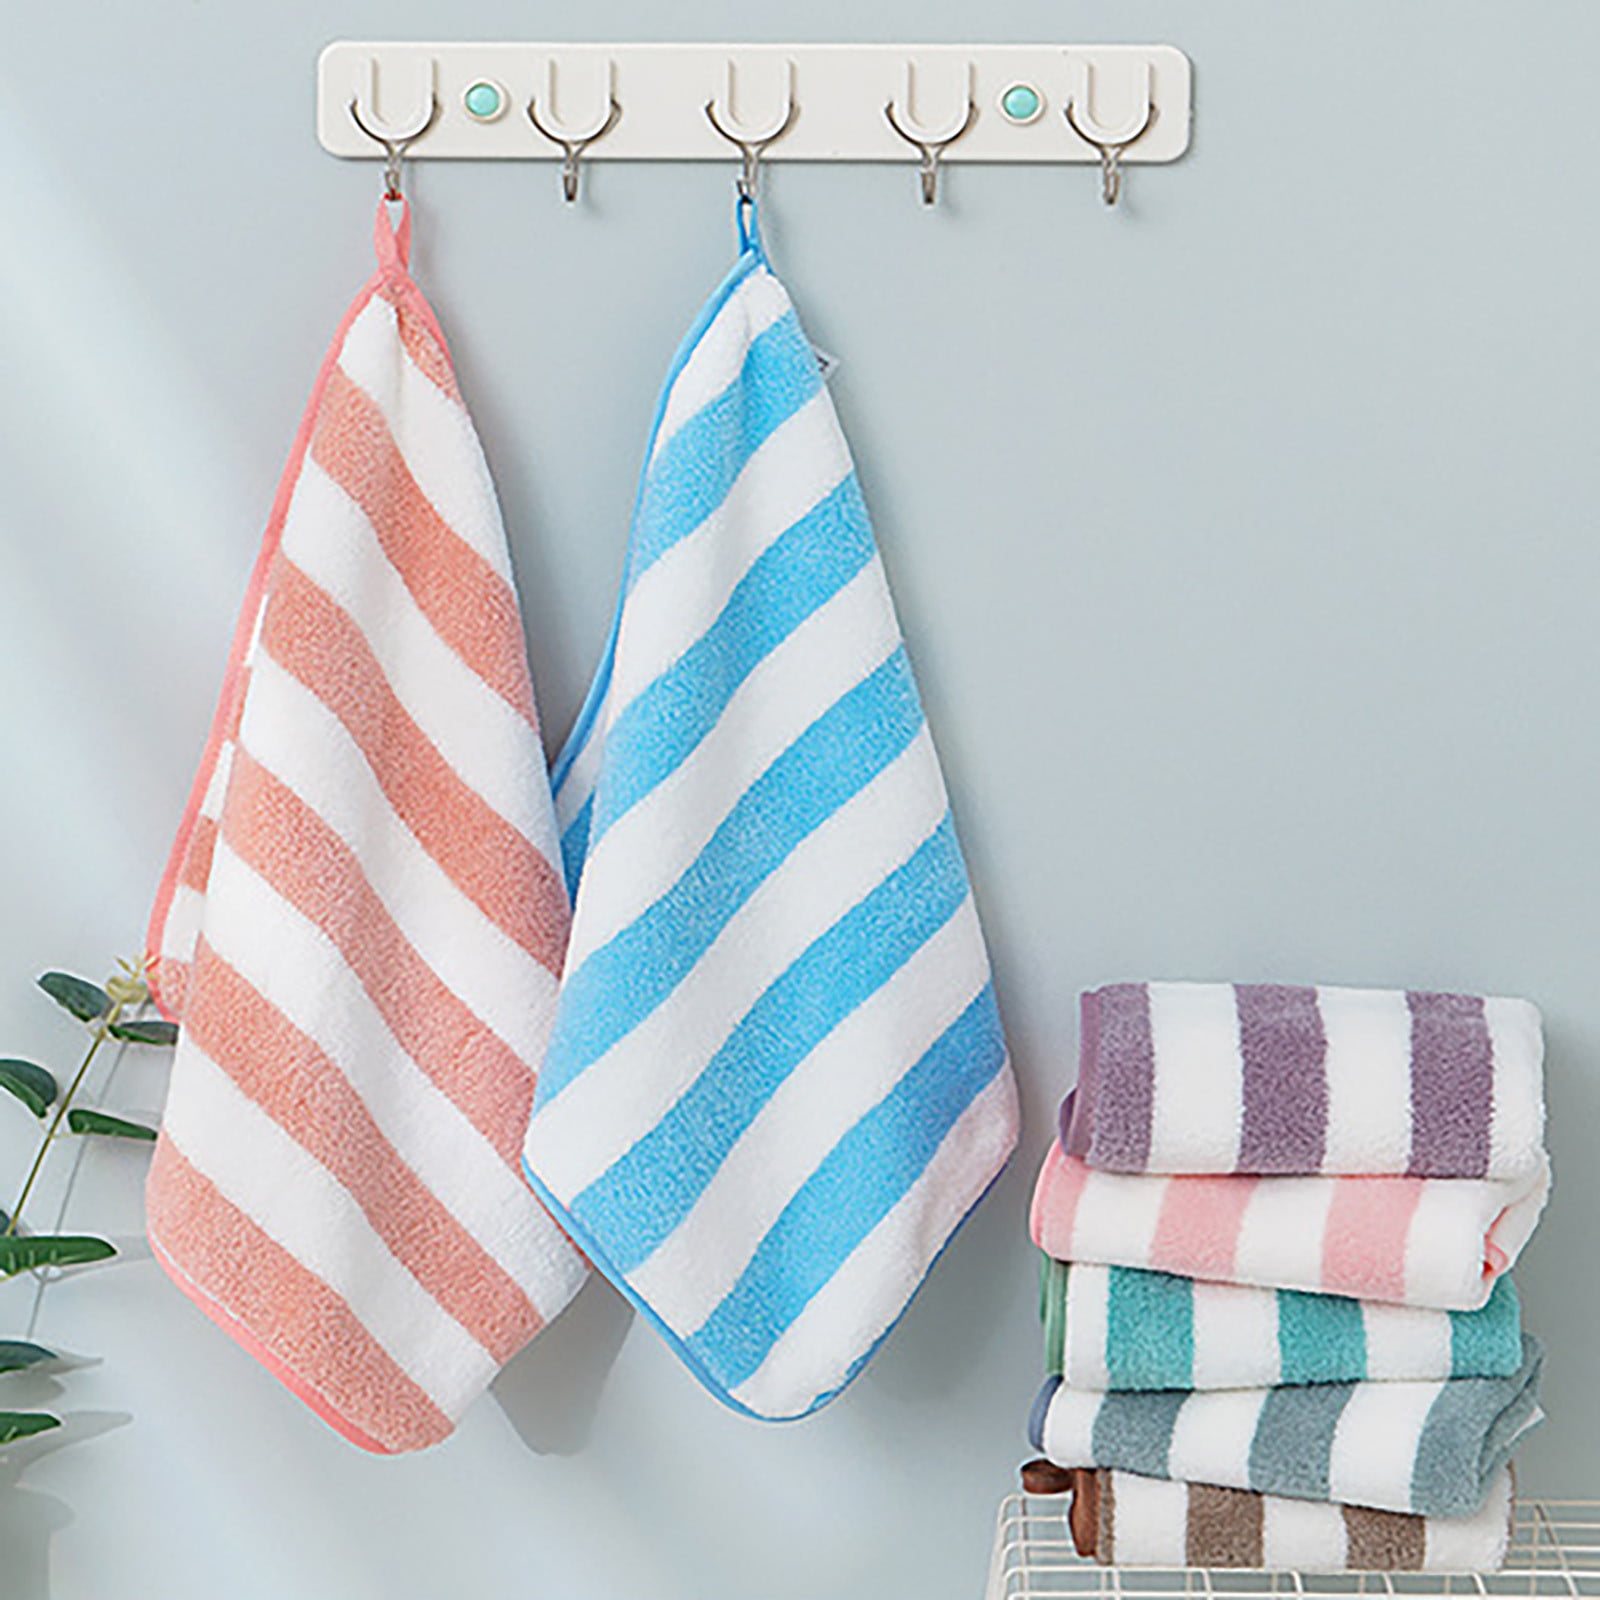  Hipruict Small Towels with Hanging Loop，Hand Dry Towels for  Kitchen & Bathroom, Super Absorbent Soft Small Hanging Towel Set with Hanging  Loop, Machine Washable Towel Fast Drying, Set of 5 